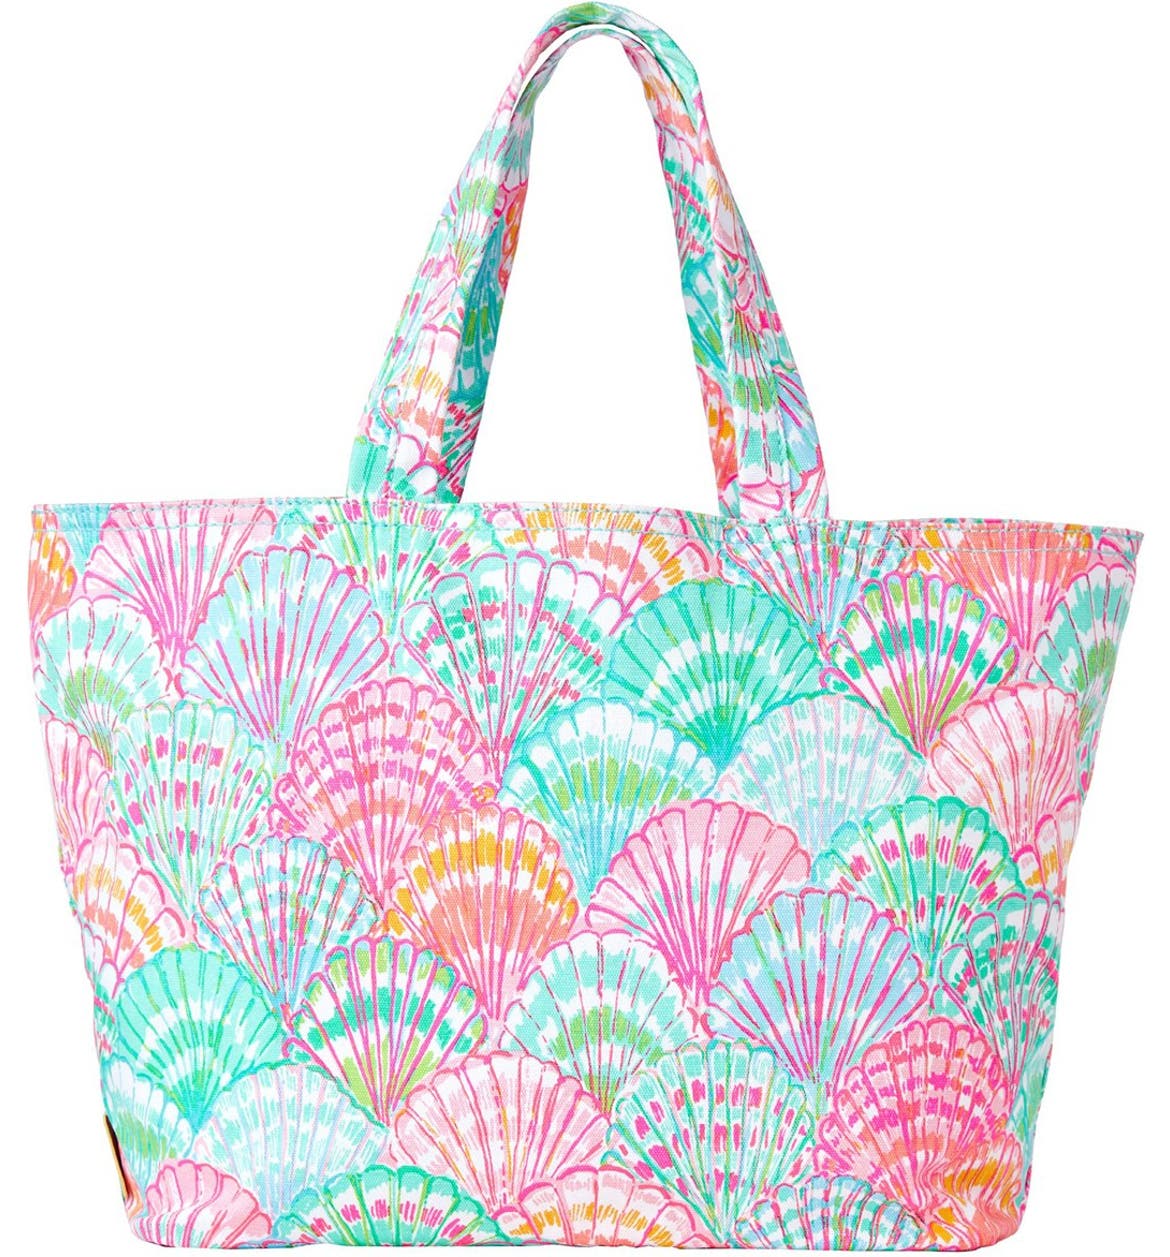 Lilly Pulitzer® Print Canvas Beach Tote | Nordstrom